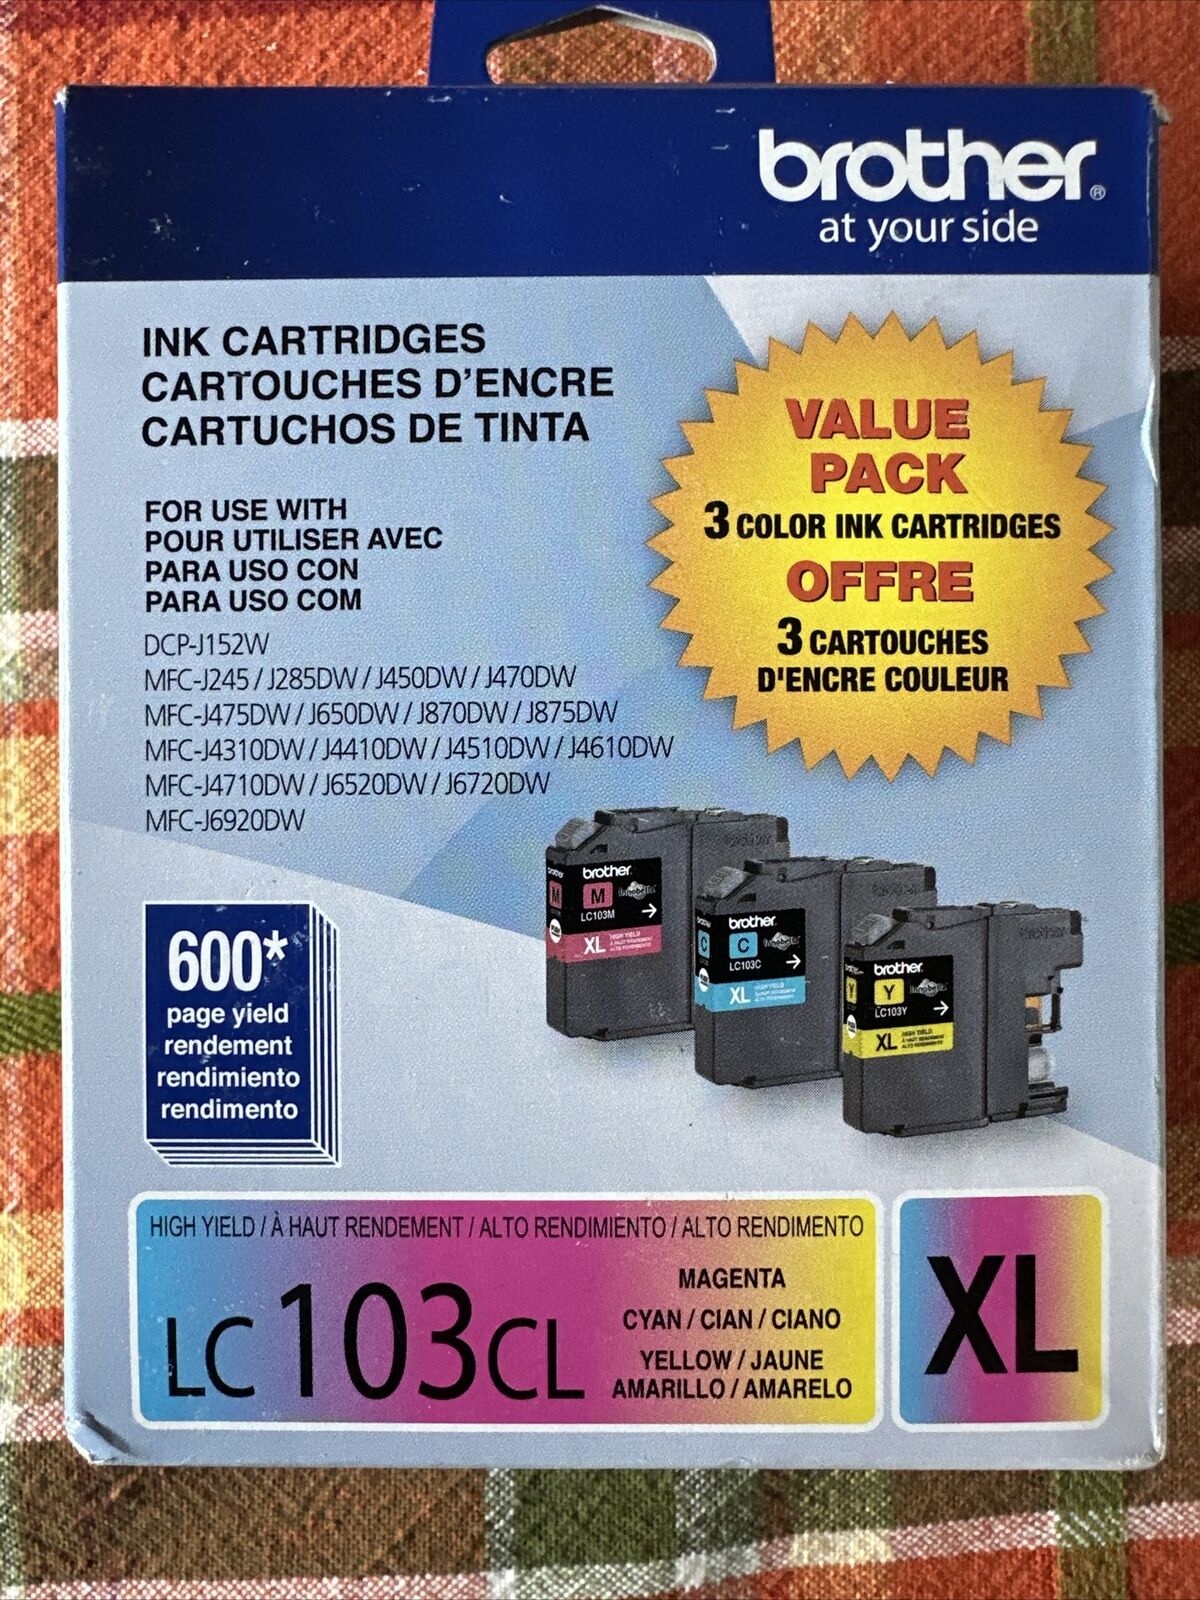 New EOM Brother LC103CL XL Value Pack 3 Ink Cartridges 04-26exp